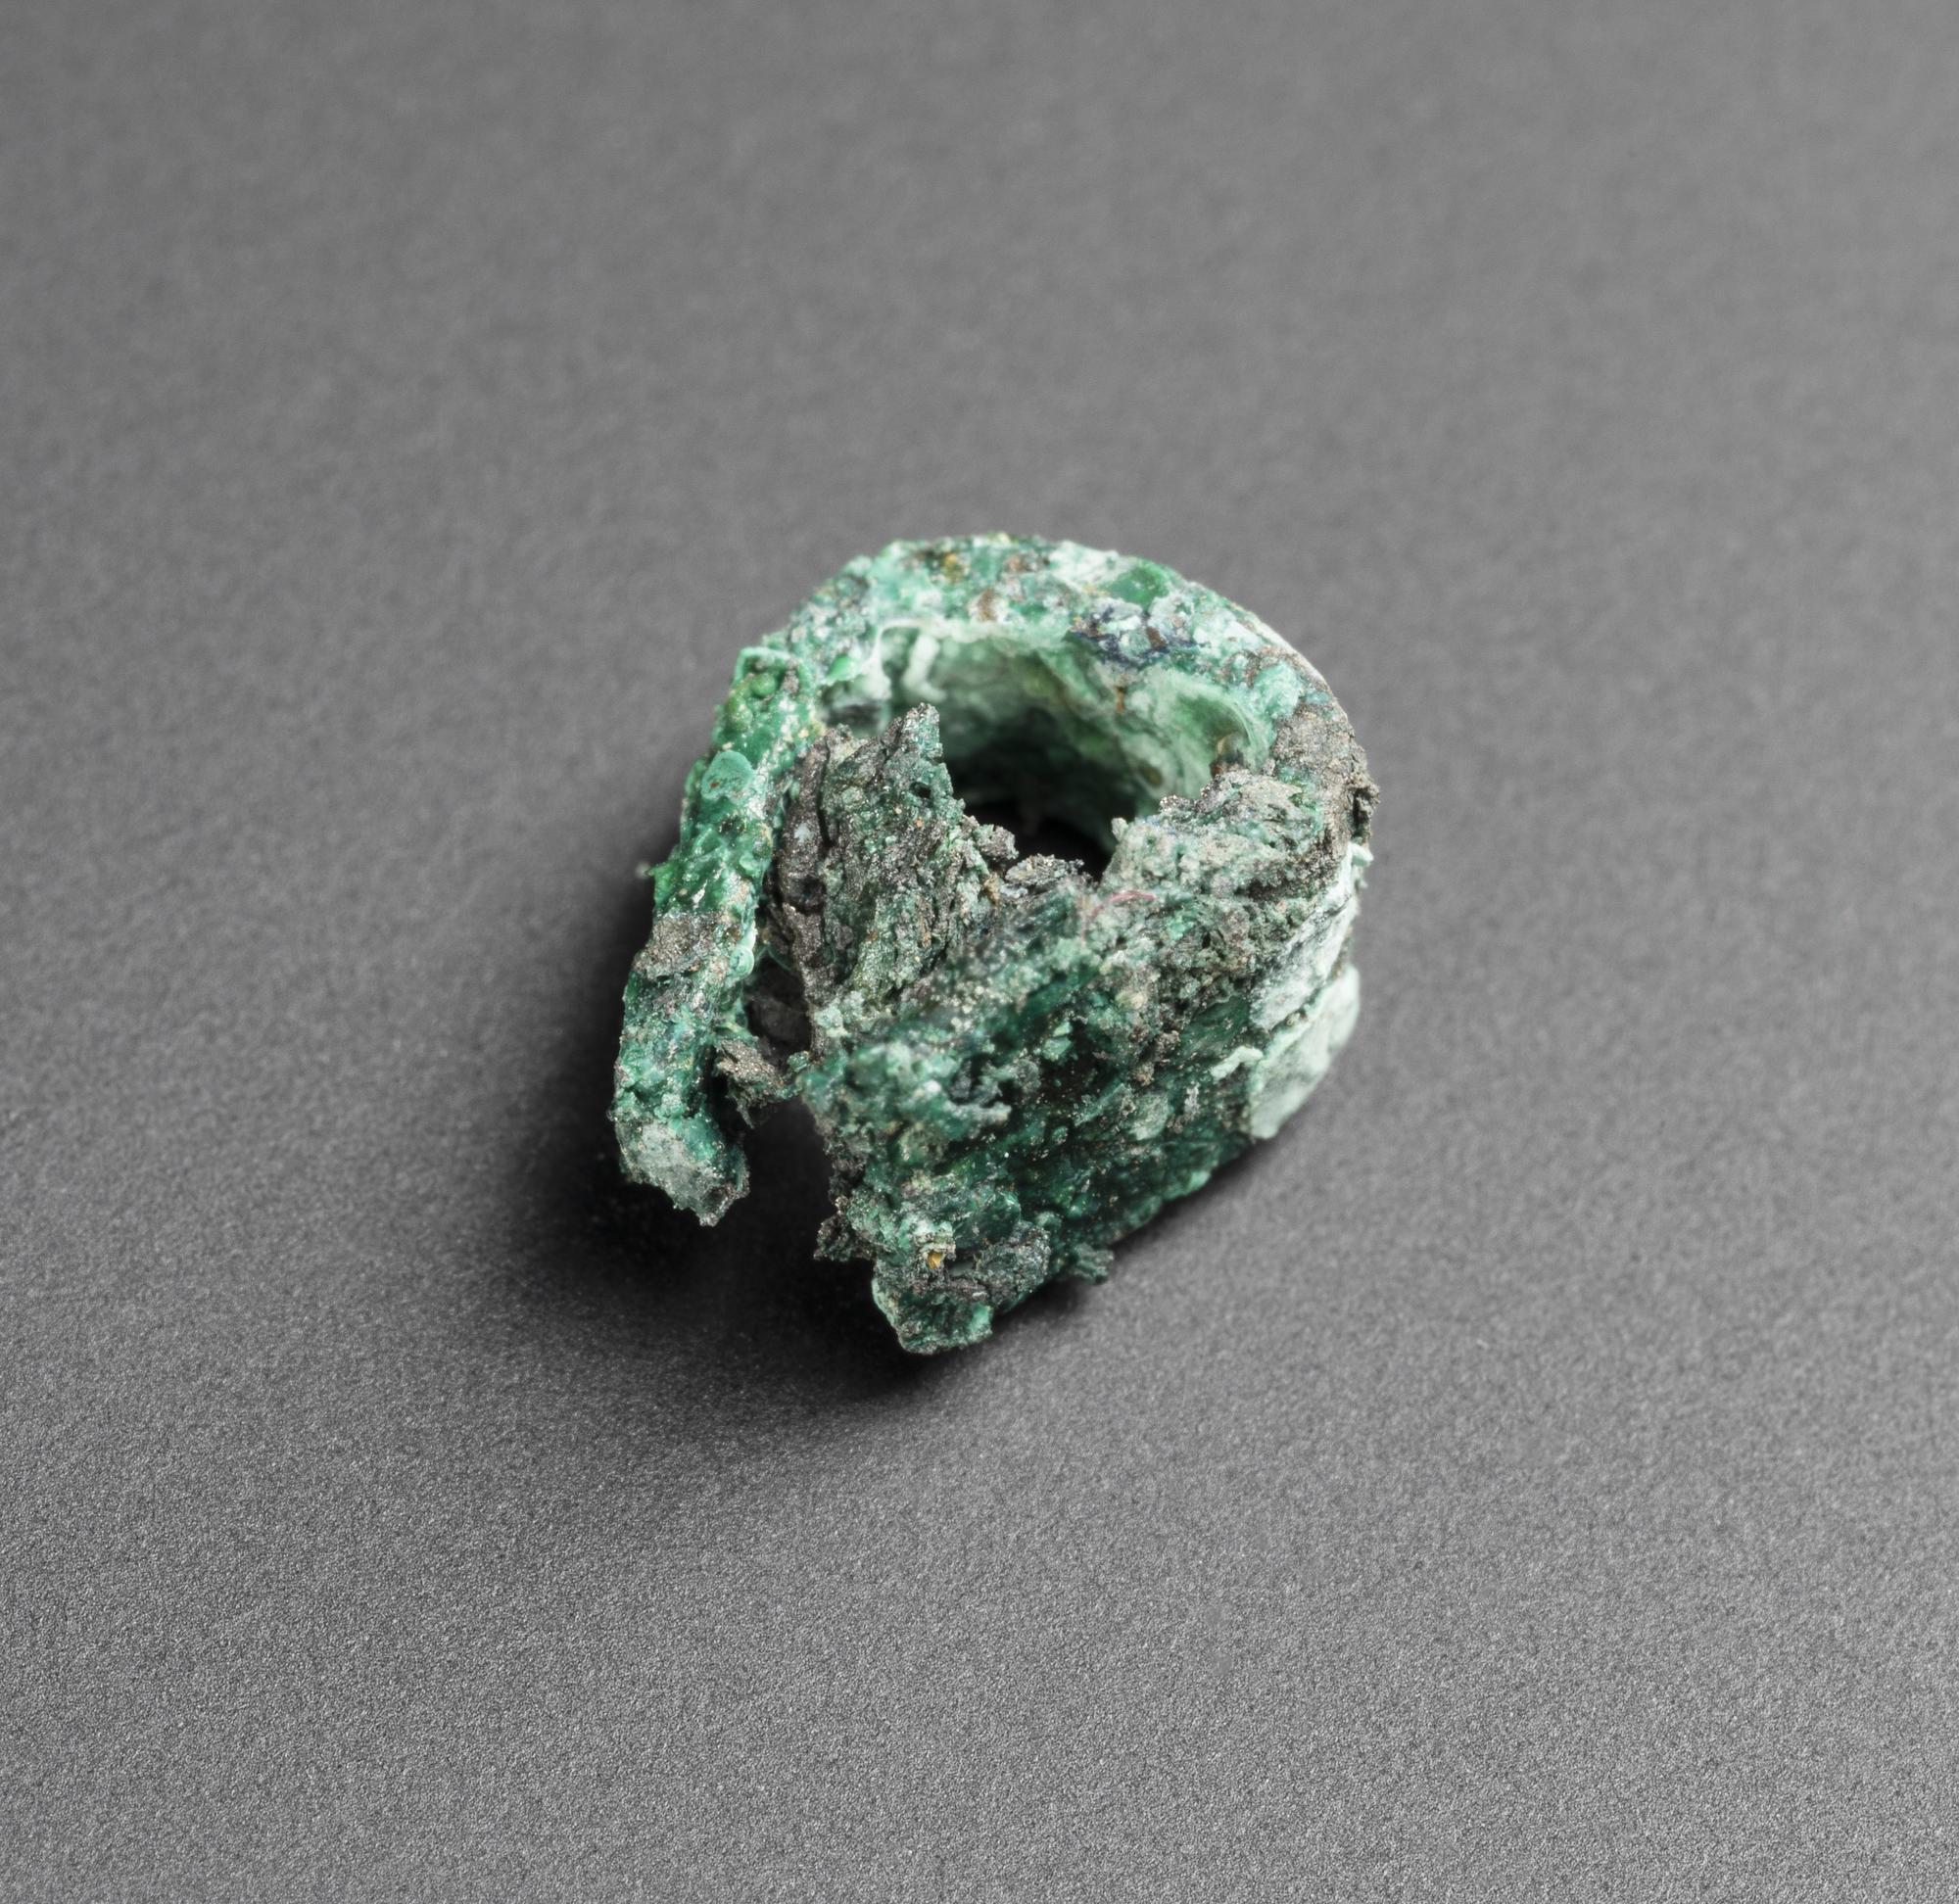 Image of Finding, from the Viking age Galloway Hoard © National Museums Scotland